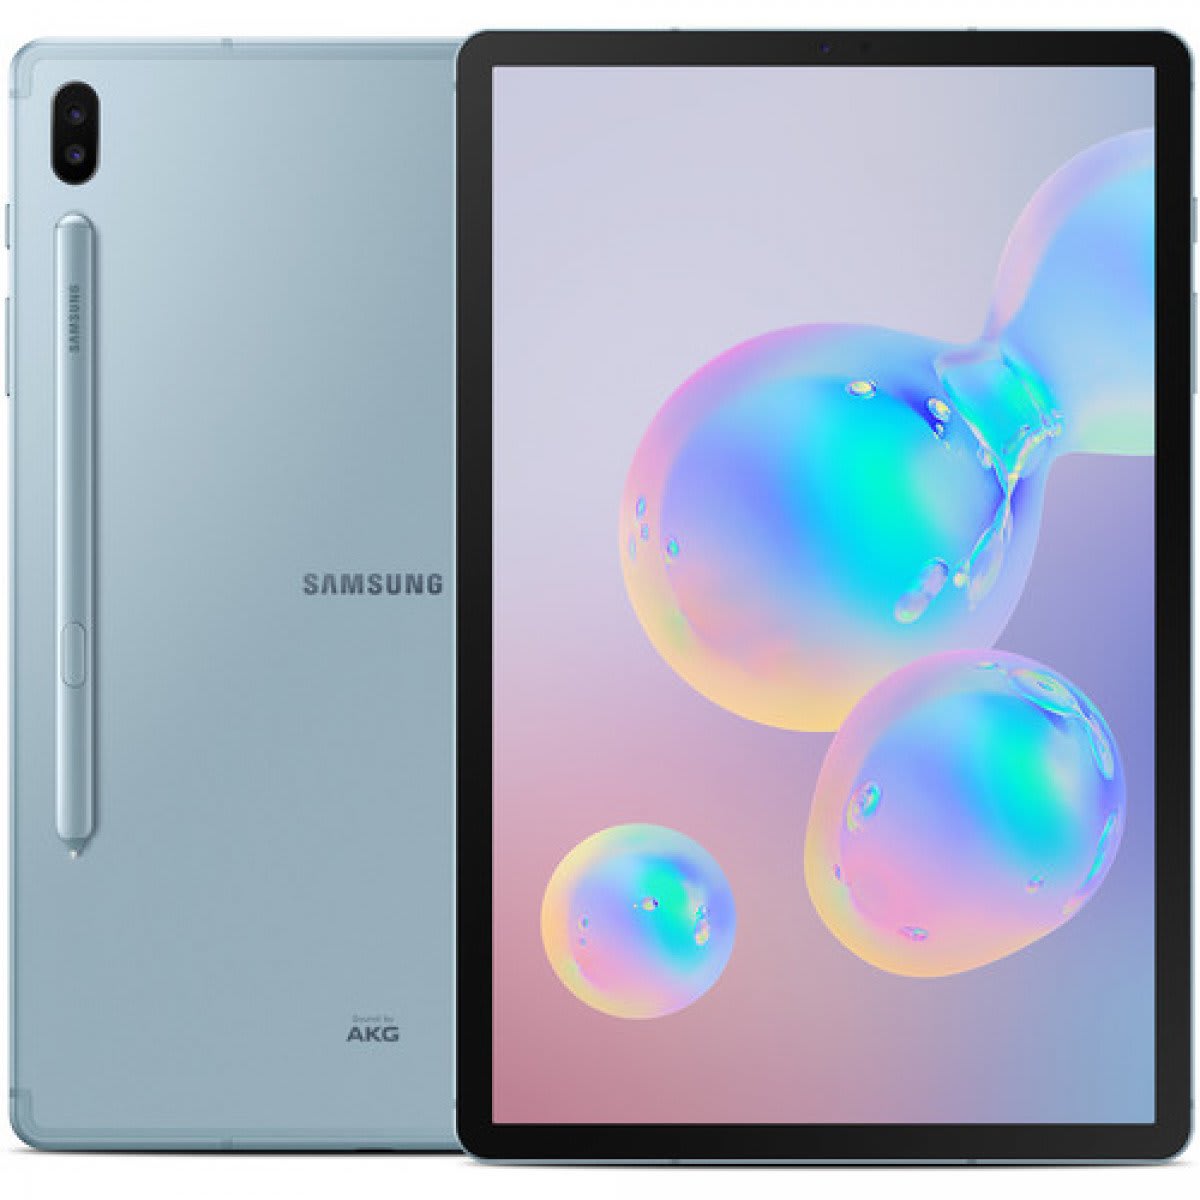 Samsung Galaxy Tab S6 Lite Price Specifications - Mobile Phone Price Online